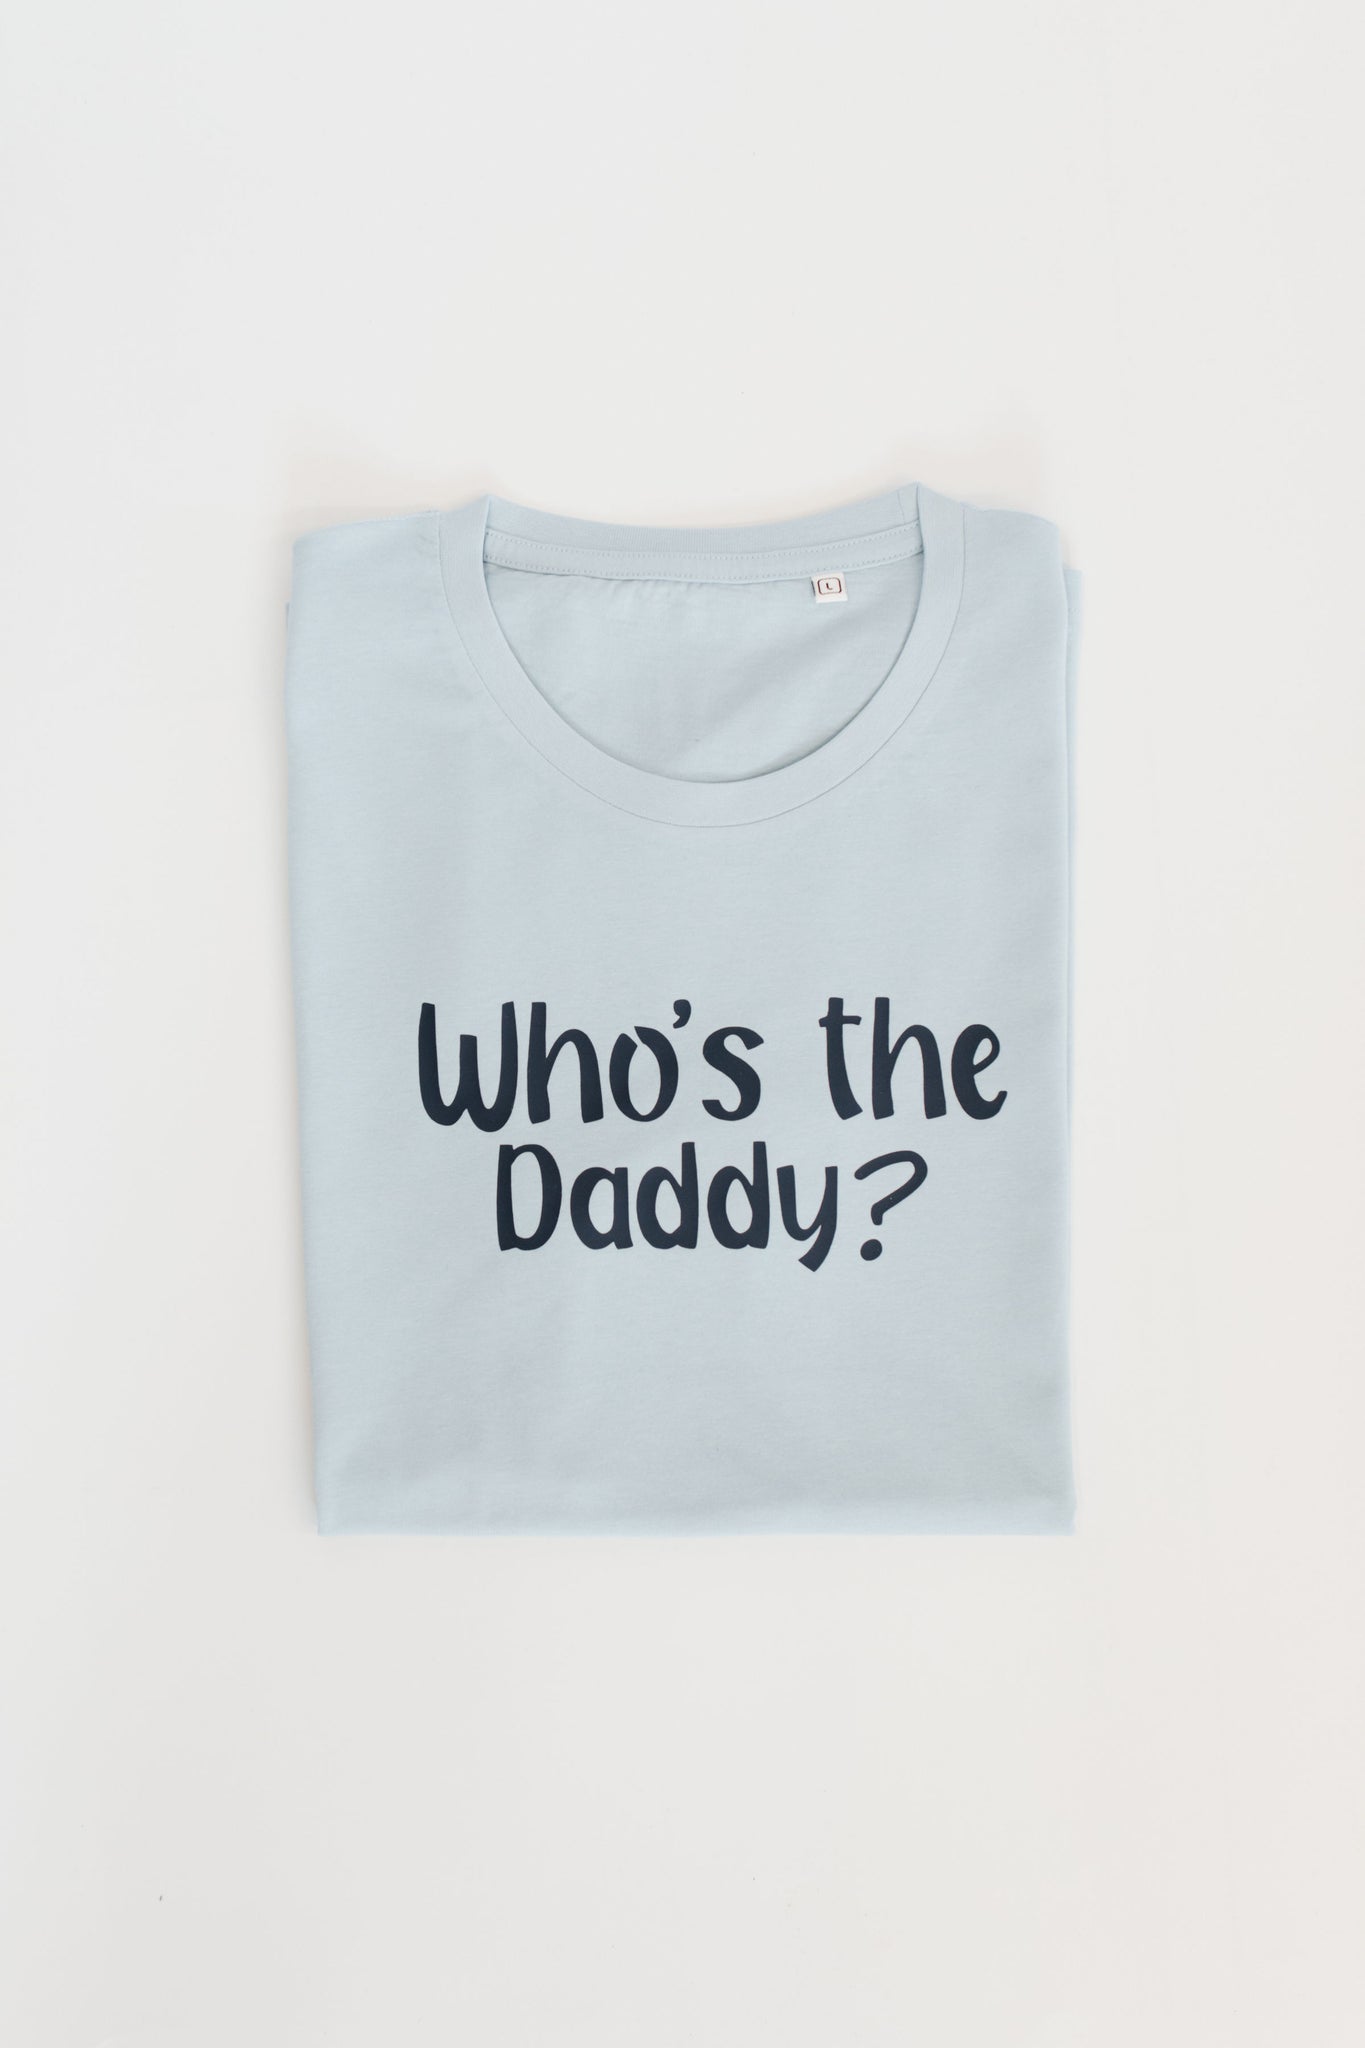 Who's the Daddy? T-shirt